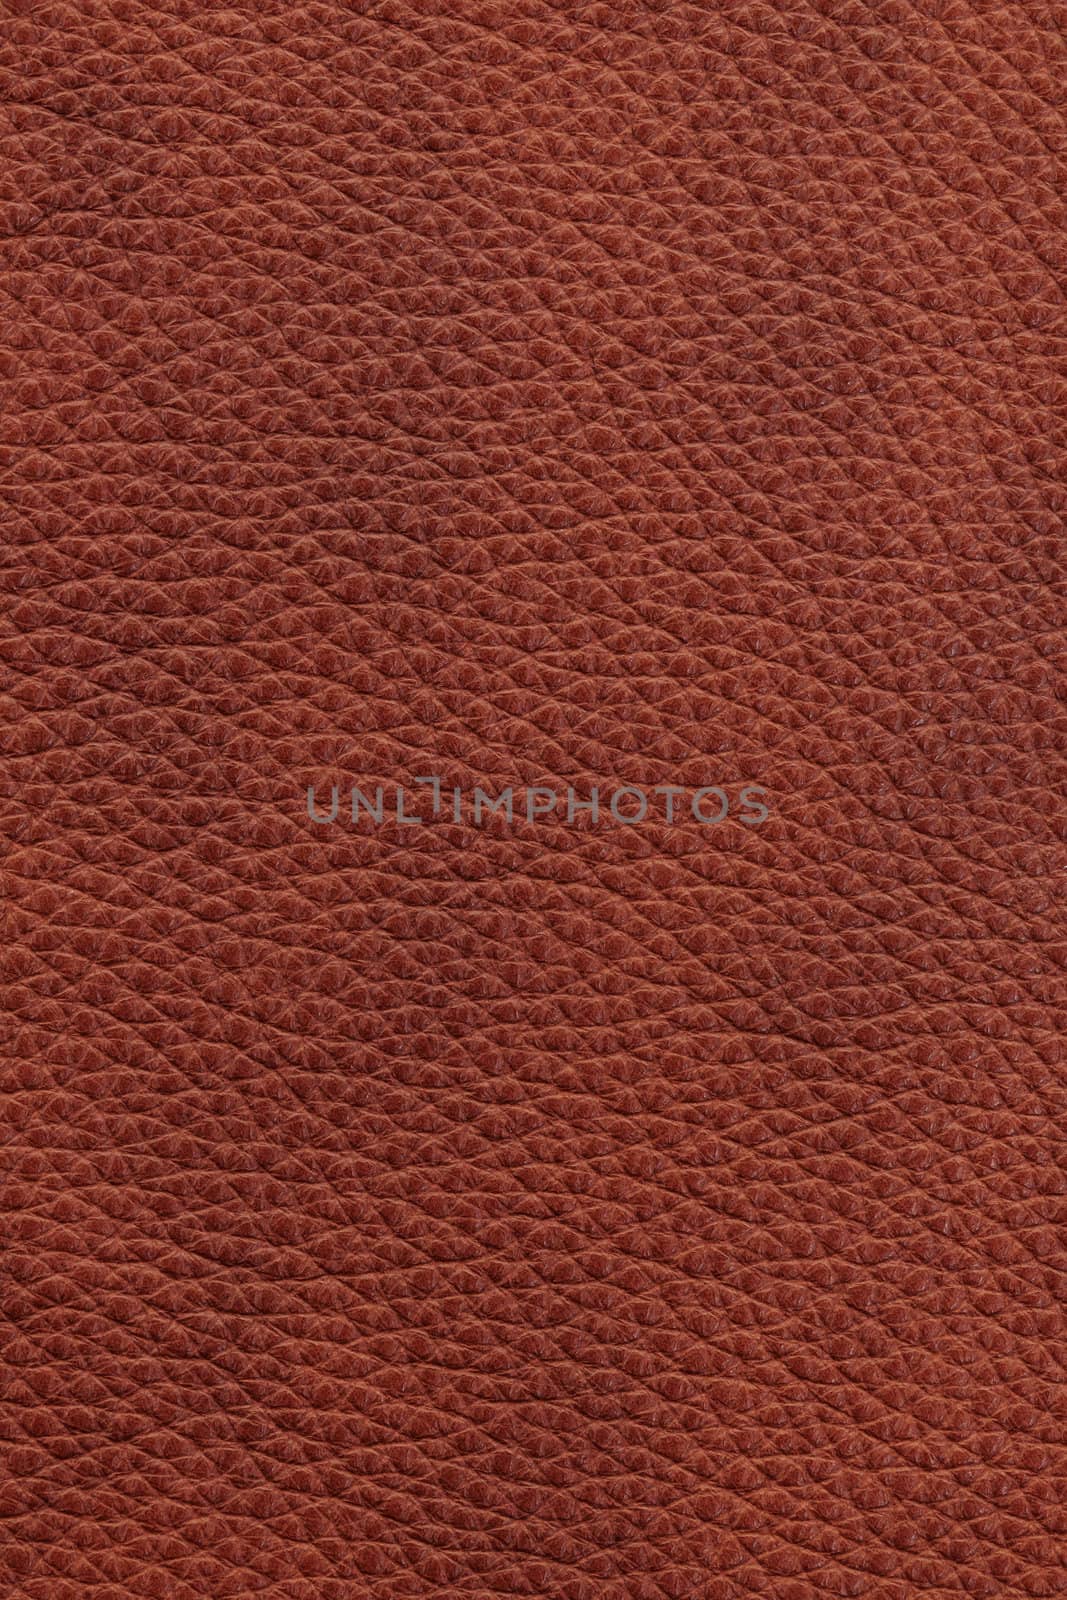 Brown natural leather background or texture close up